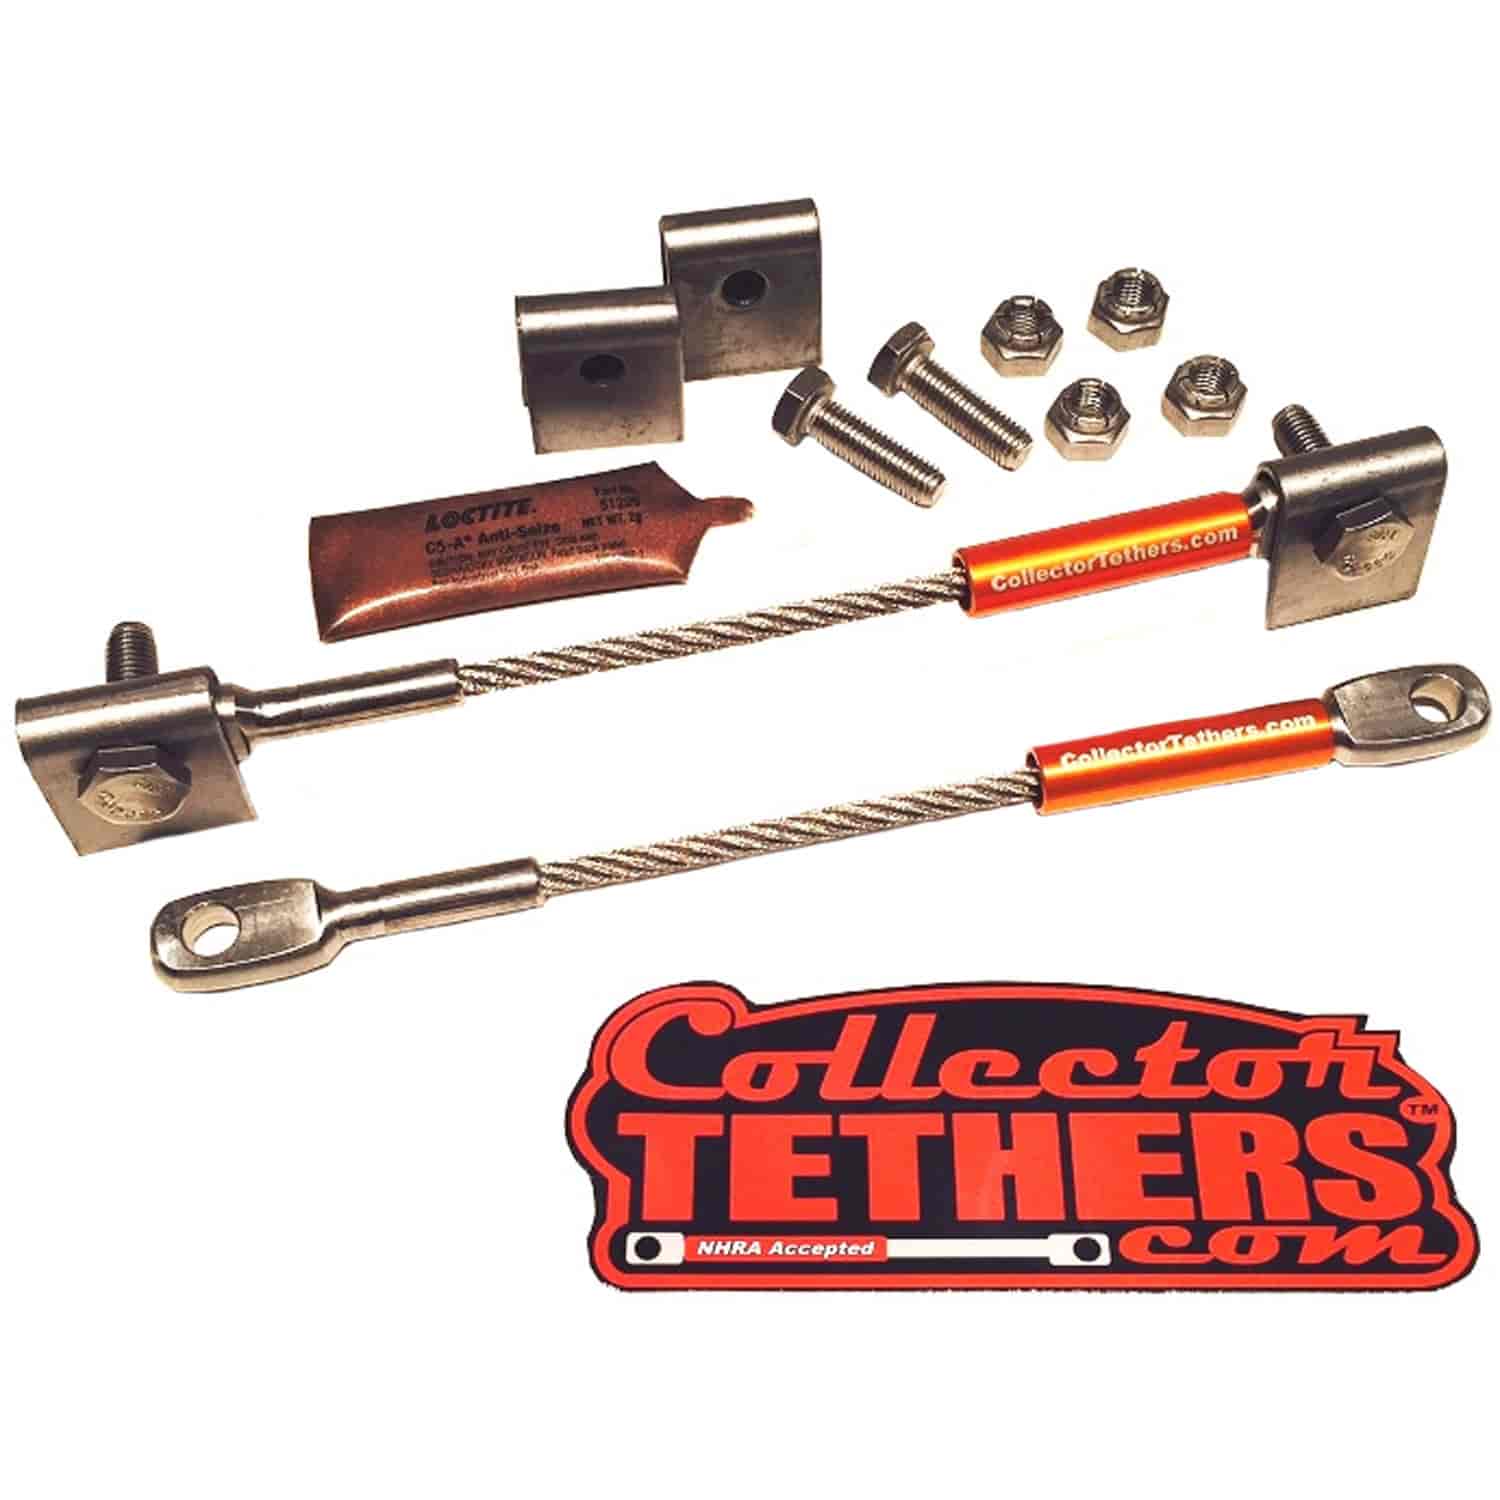 Weld On Collector Tether Kit Stainless Steel Brackets with Orange Marking Sleeve